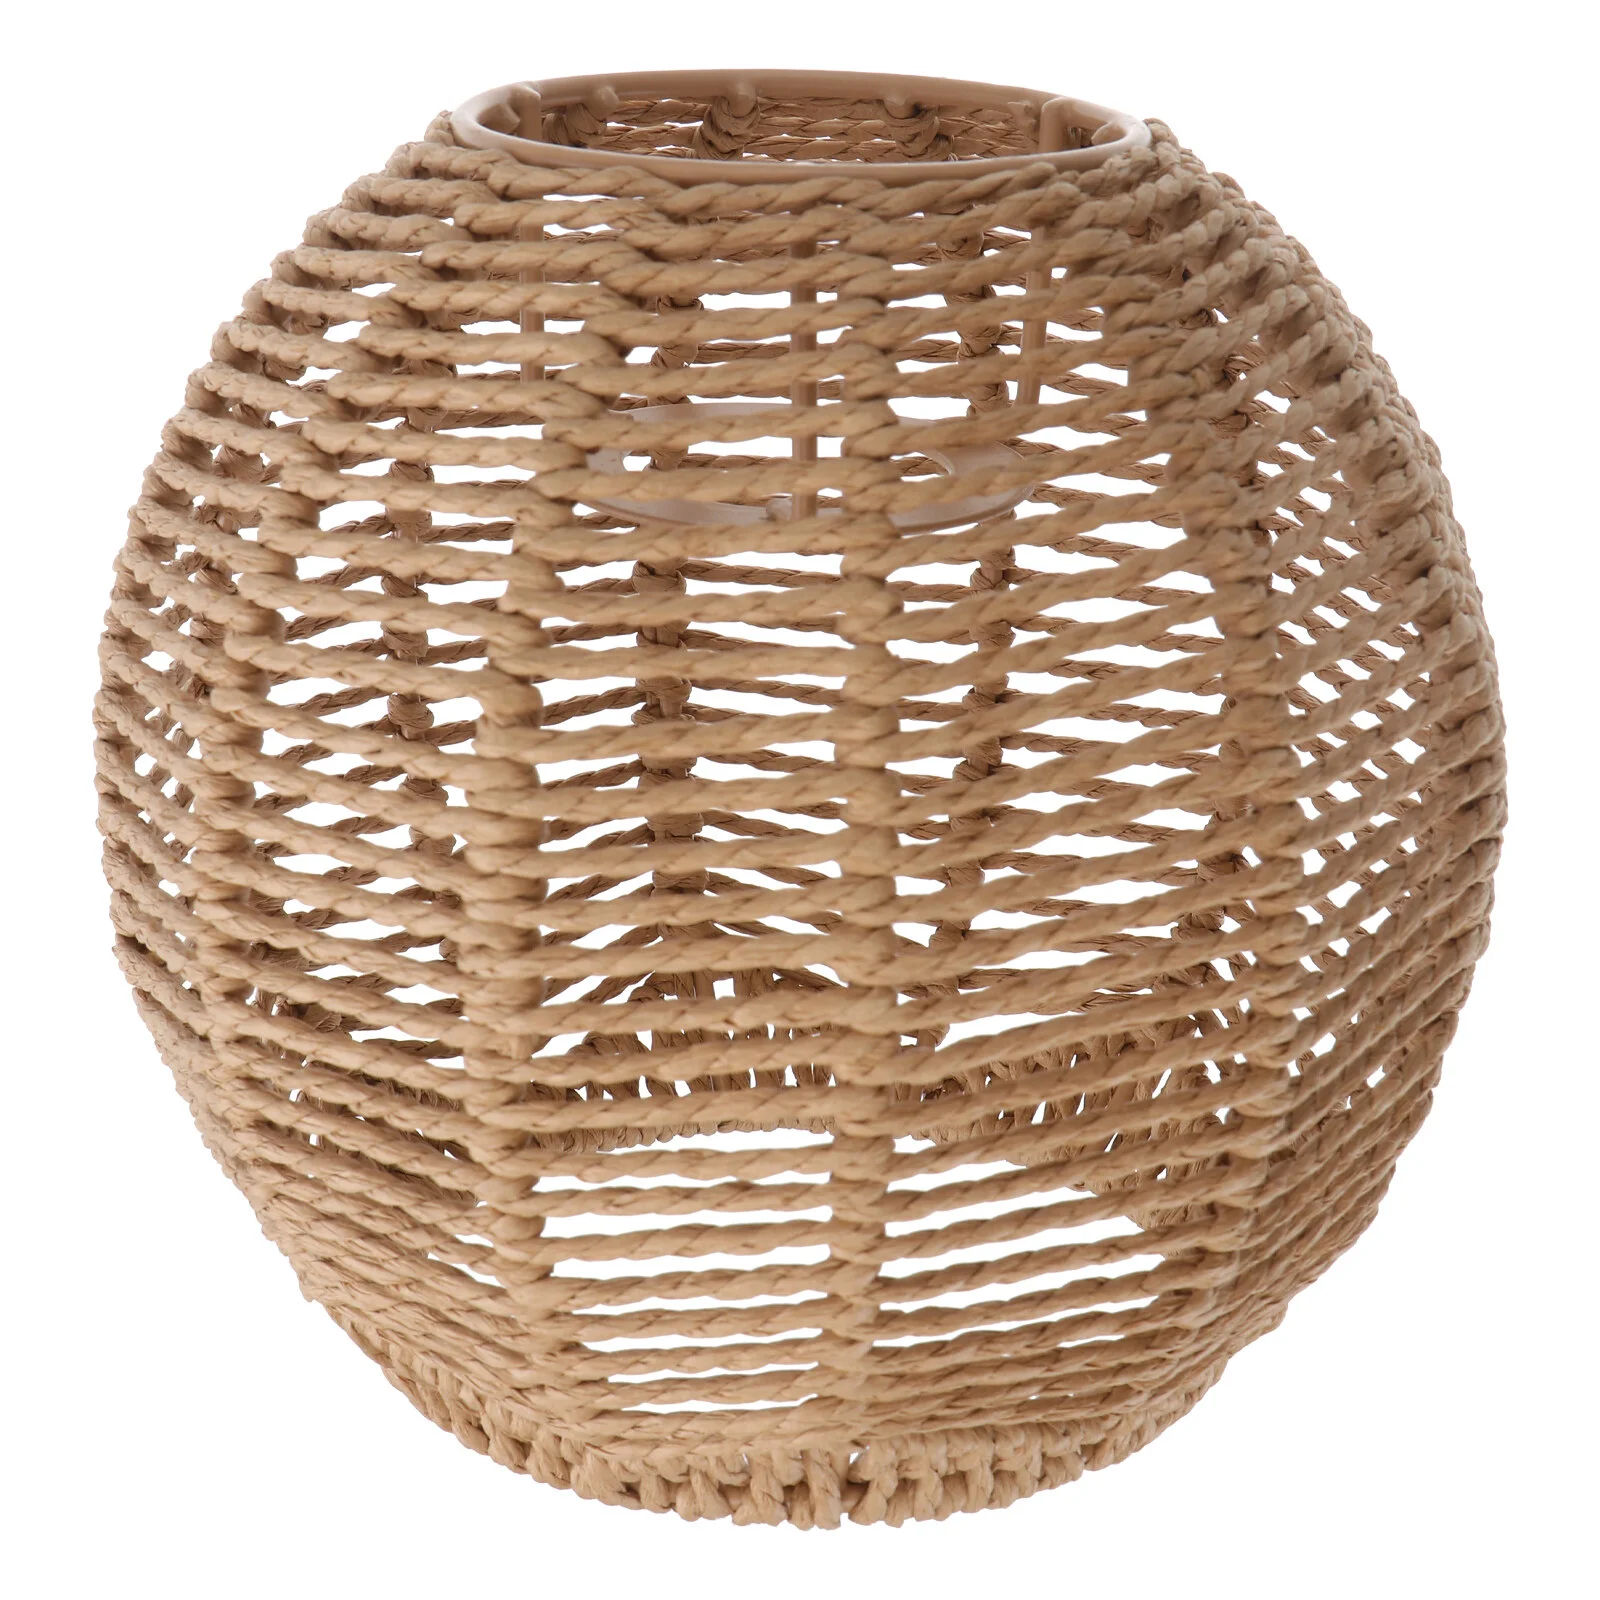 

Imitation Rattan Lampshade Creative Household Cover Adornment Dimmable LED Bulbs The Accessory Rope Miss Boho Basket